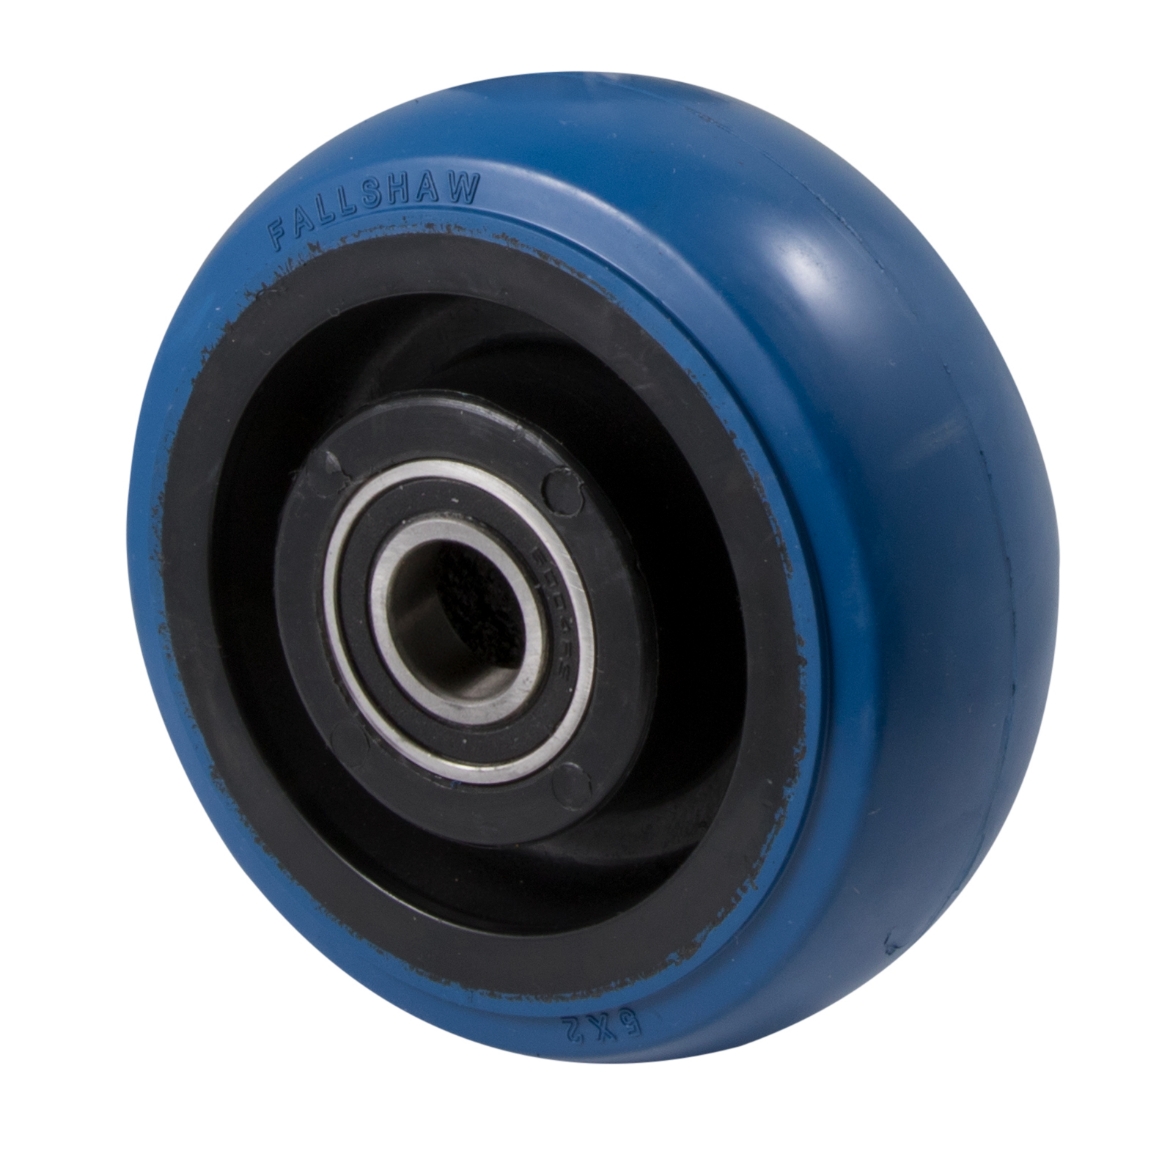 Picture of O Series Hi-Res Blue Rubber Wheel 125mm Diameter x 50mm Width, Precision Bearing, 60mm Hub, 20mm Bore Reduced to 1/2" with Bush, 350kg Load Rating